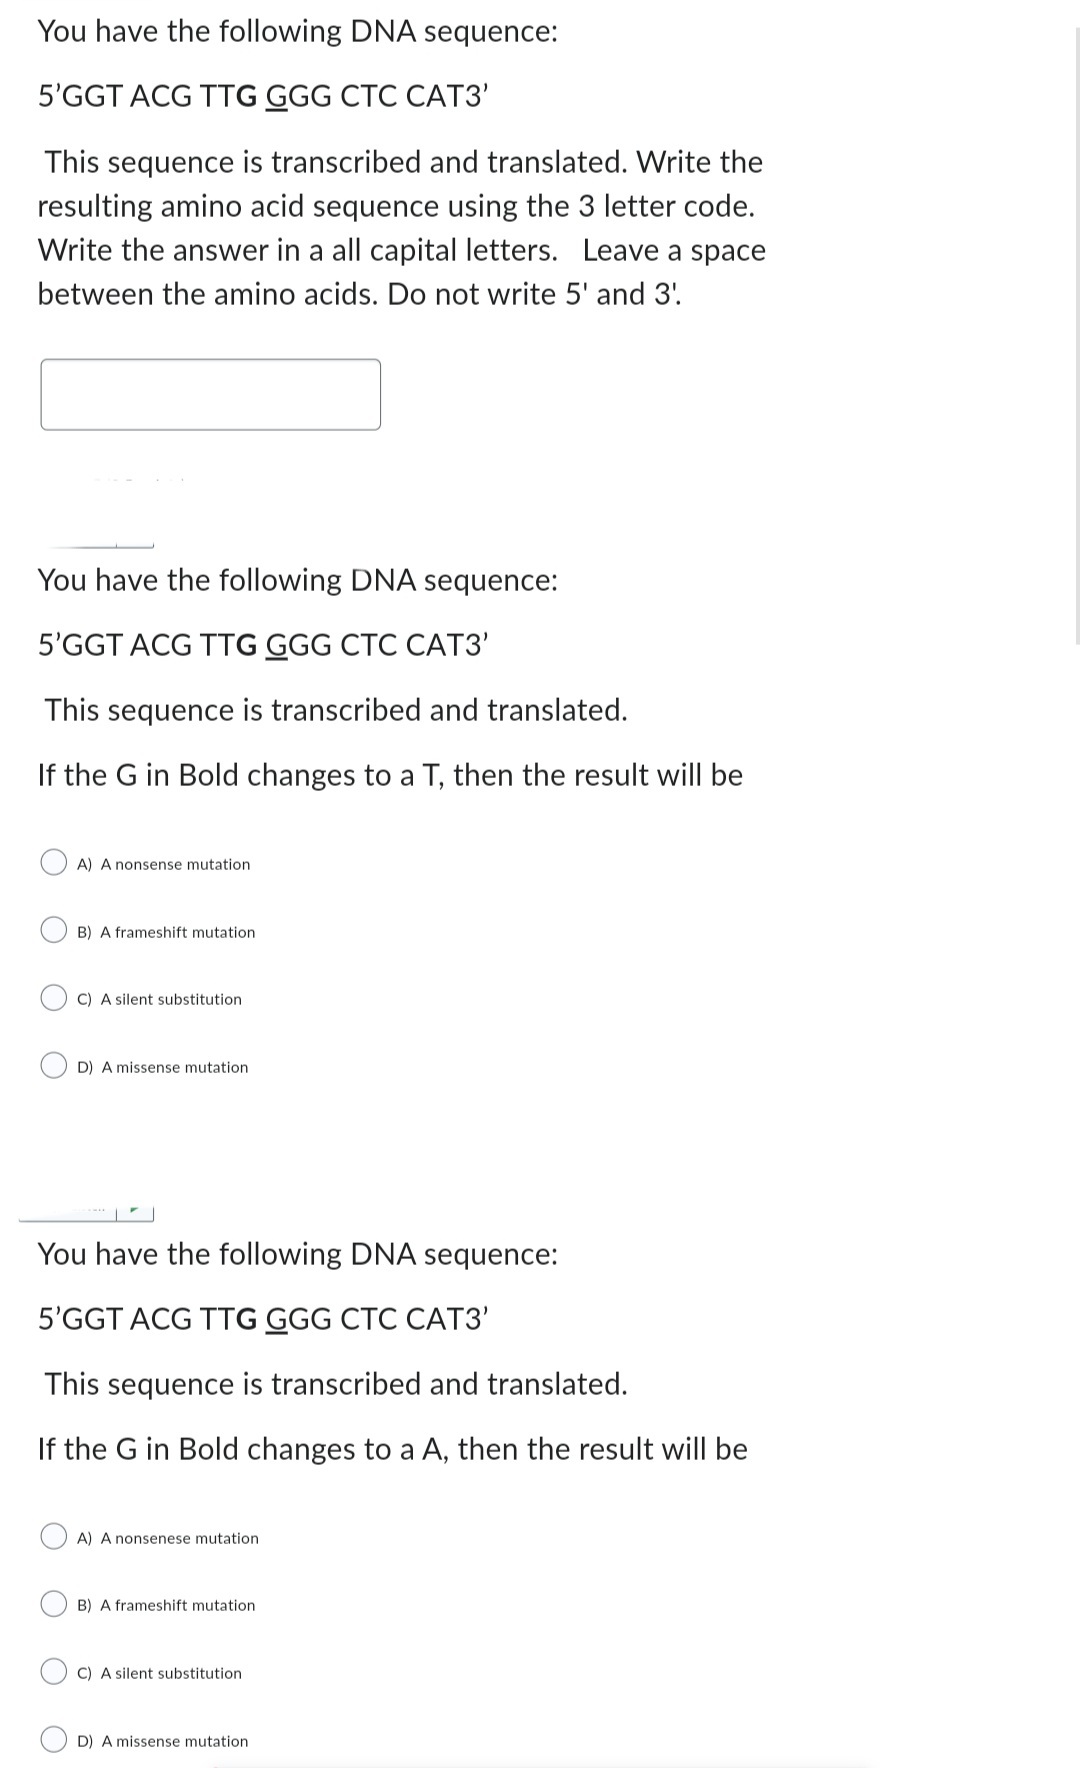 You have the following DNA sequence:
5'GGT ACG TTG GGG CTC CAT3'
This sequence is transcribed and translated. Write the
resulting amino acid sequence using the 3 letter code.
Write the answer in a all capital letters. Leave a space
between the amino acids. Do not write 5' and 3'.
You have the following DNA sequence:
5'GGT ACG TTG GGG CTC CAT3'
This sequence is transcribed and translated.
If the G in Bold changes to a T, then the result will be
A) A nonsense mutation
B) A frameshift mutation
C) A silent substitution
D) A missense mutation
You have the following DNA sequence:
5'GGT ACG TTG GGG CTC CAT3'
This sequence is transcribed and translated.
If the G in Bold changes to a A, then the result will be
A) A nonsenese mutation
B) A frameshift mutation
C) A silent substitution
D) A missense mutation